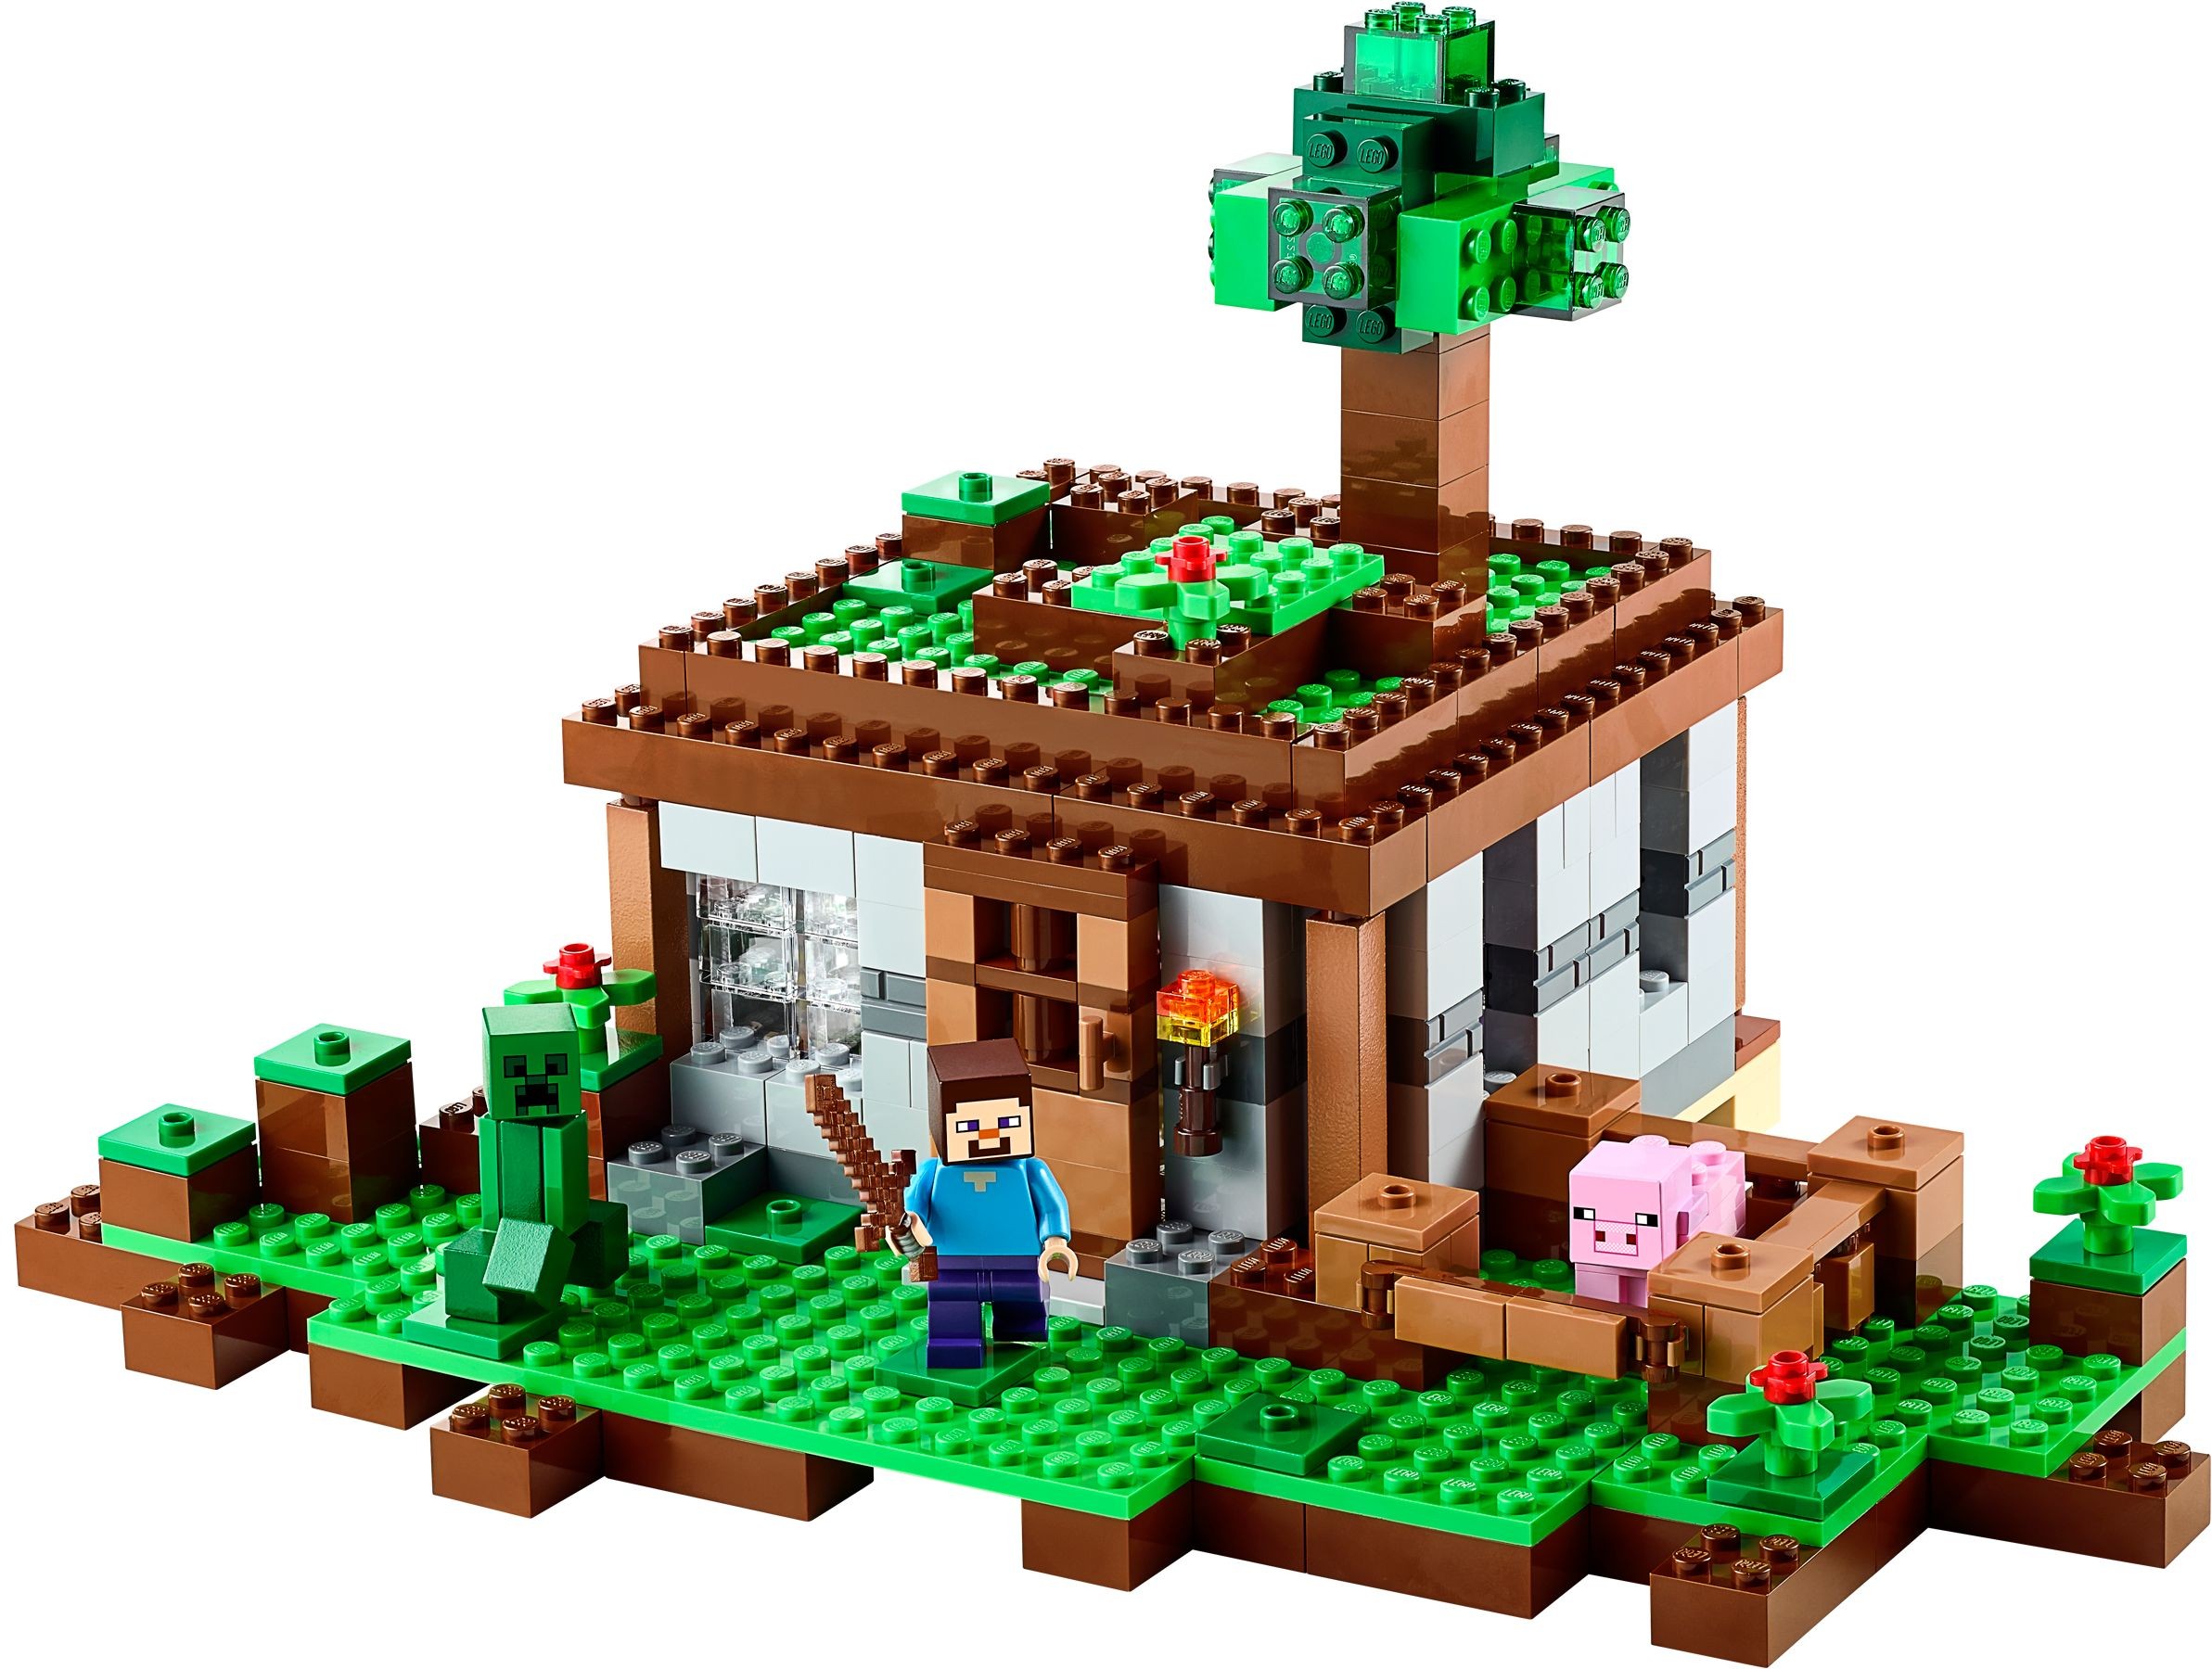 Find amazing products in LEGO Minecraft today